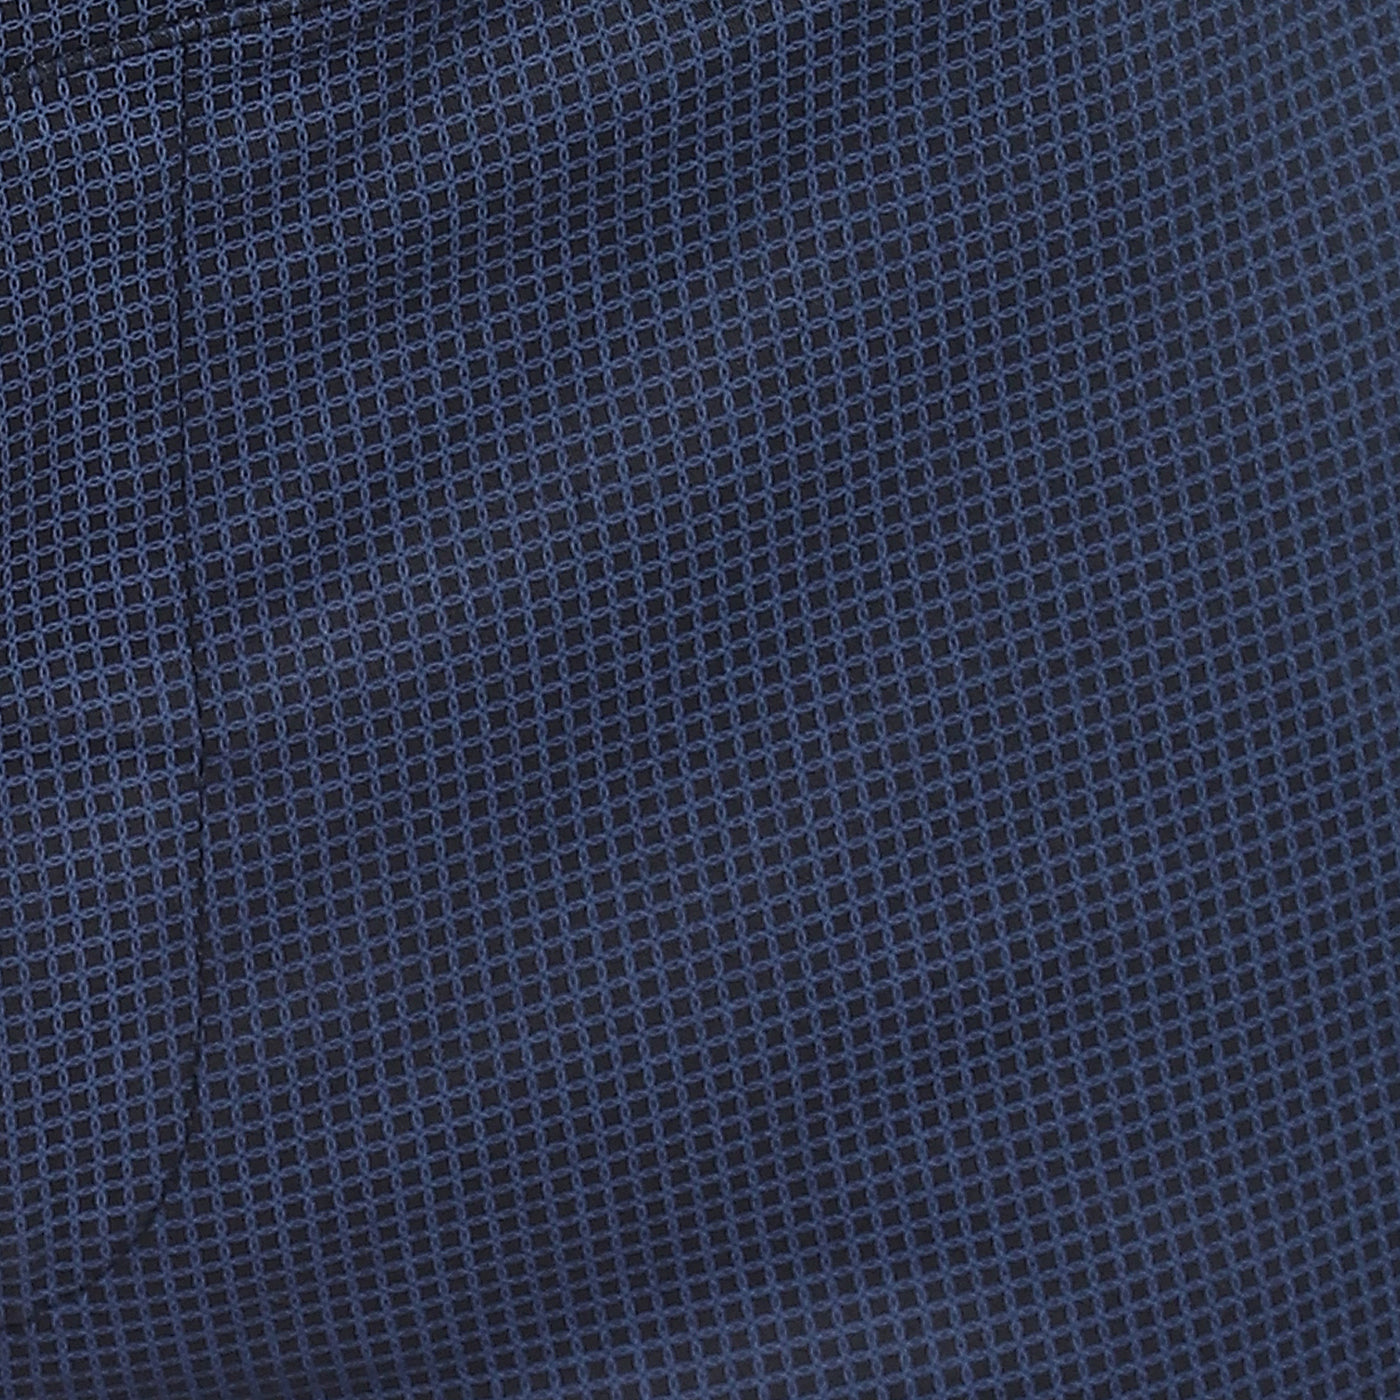 Navy Blue Ultra Slim Fit Checked Trouser